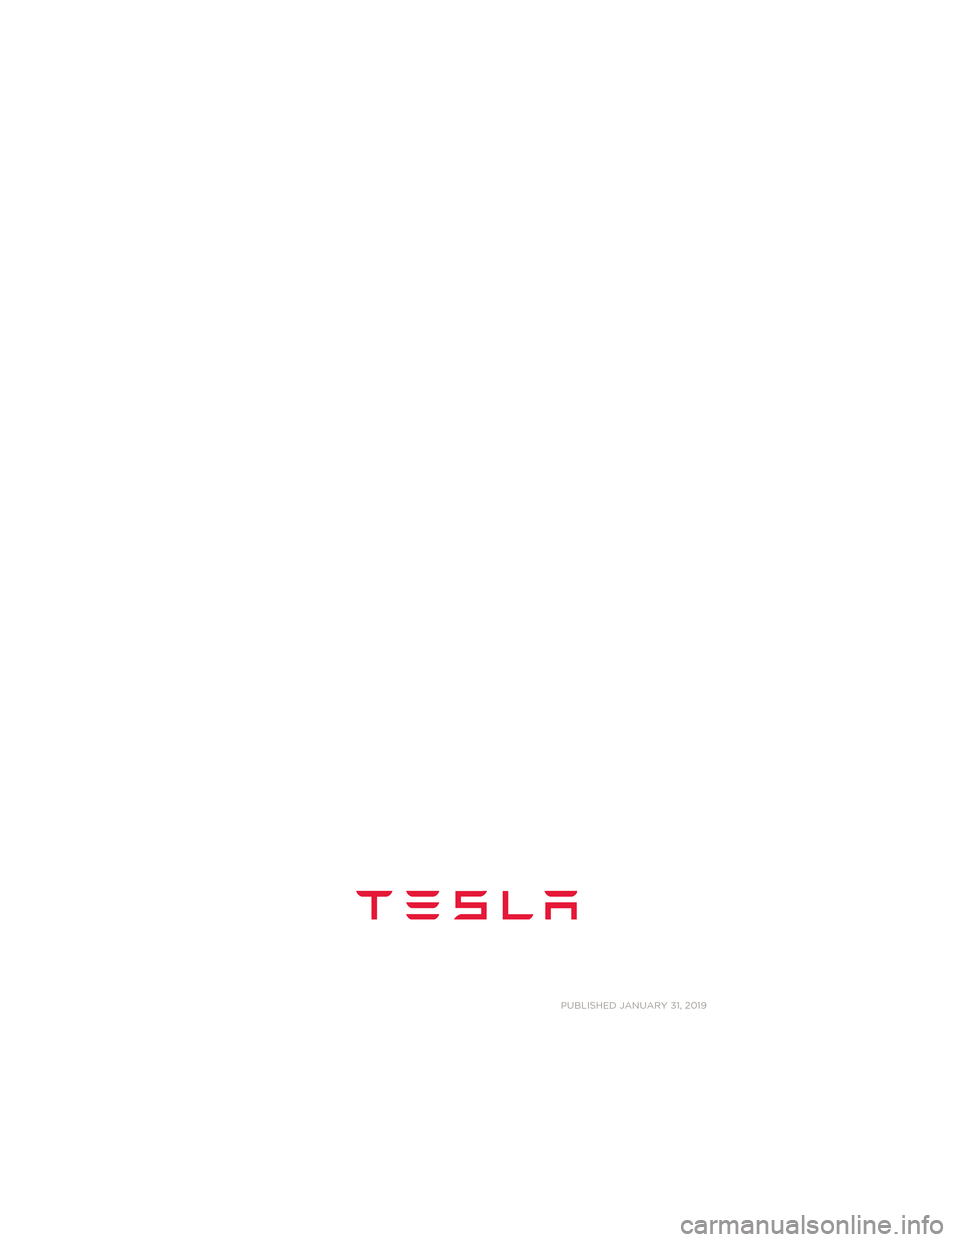 TESLA MODEL 3 2019  Manual do proprietário (in Portuguese) PUBLISHED JANUARY 31, 2019
Model S Quick Guide - NA Rev C.book  Page
 2  Wednesday, December 18, 2013  12:40 PM 